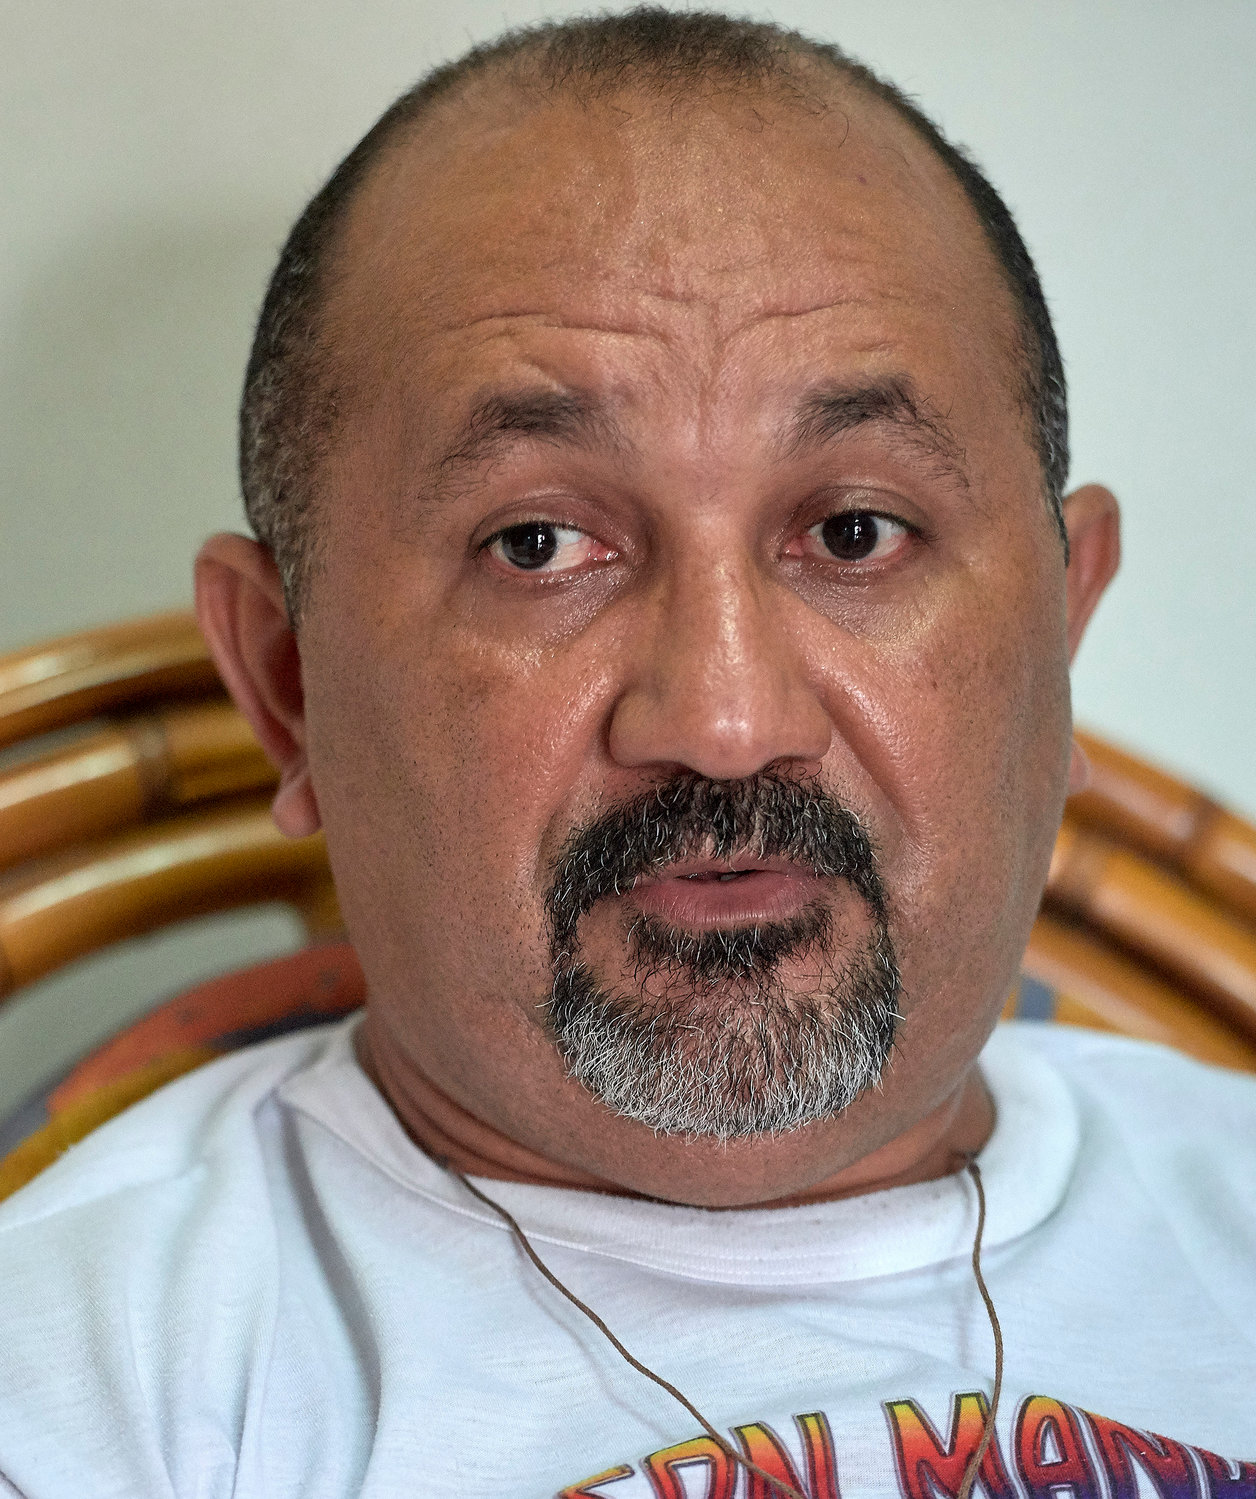 Father Jose Amaro Lopes de Souza speaks to an interviewer in Altamira, Brazil, in April 2019, when he was living under house arrest in the bishop's residence. Father de Souza continues to be threatened for his work defending landless peasants and small-scale farmers.